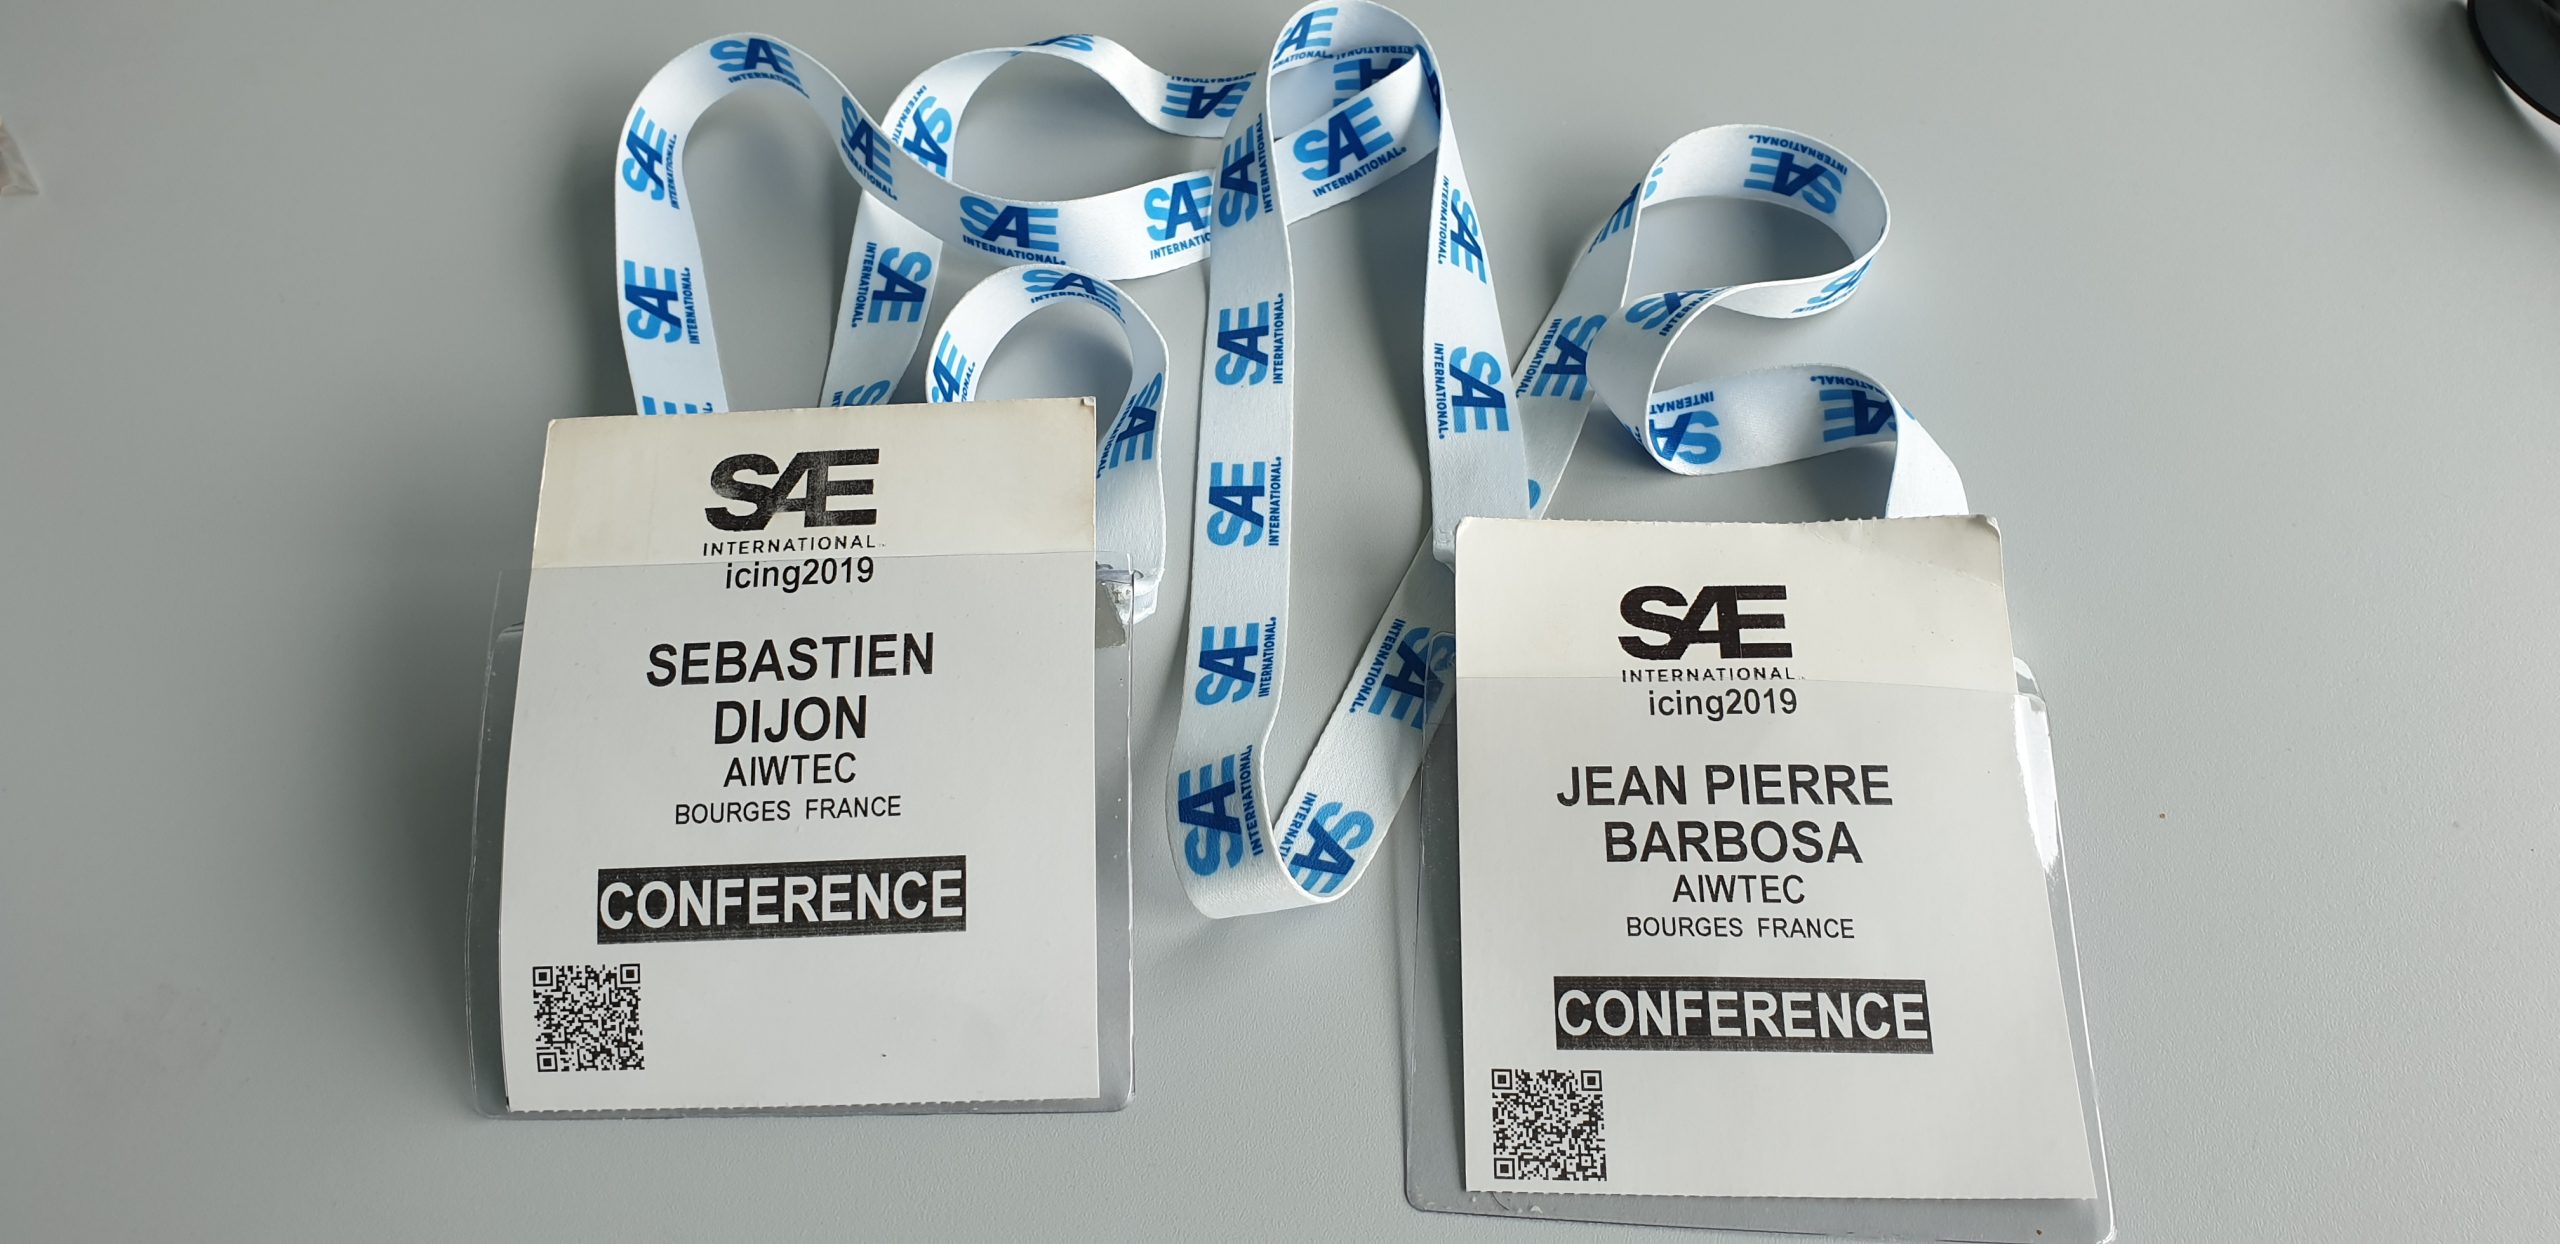 SAE International Conference on Icing of Aircraft, Engines, and